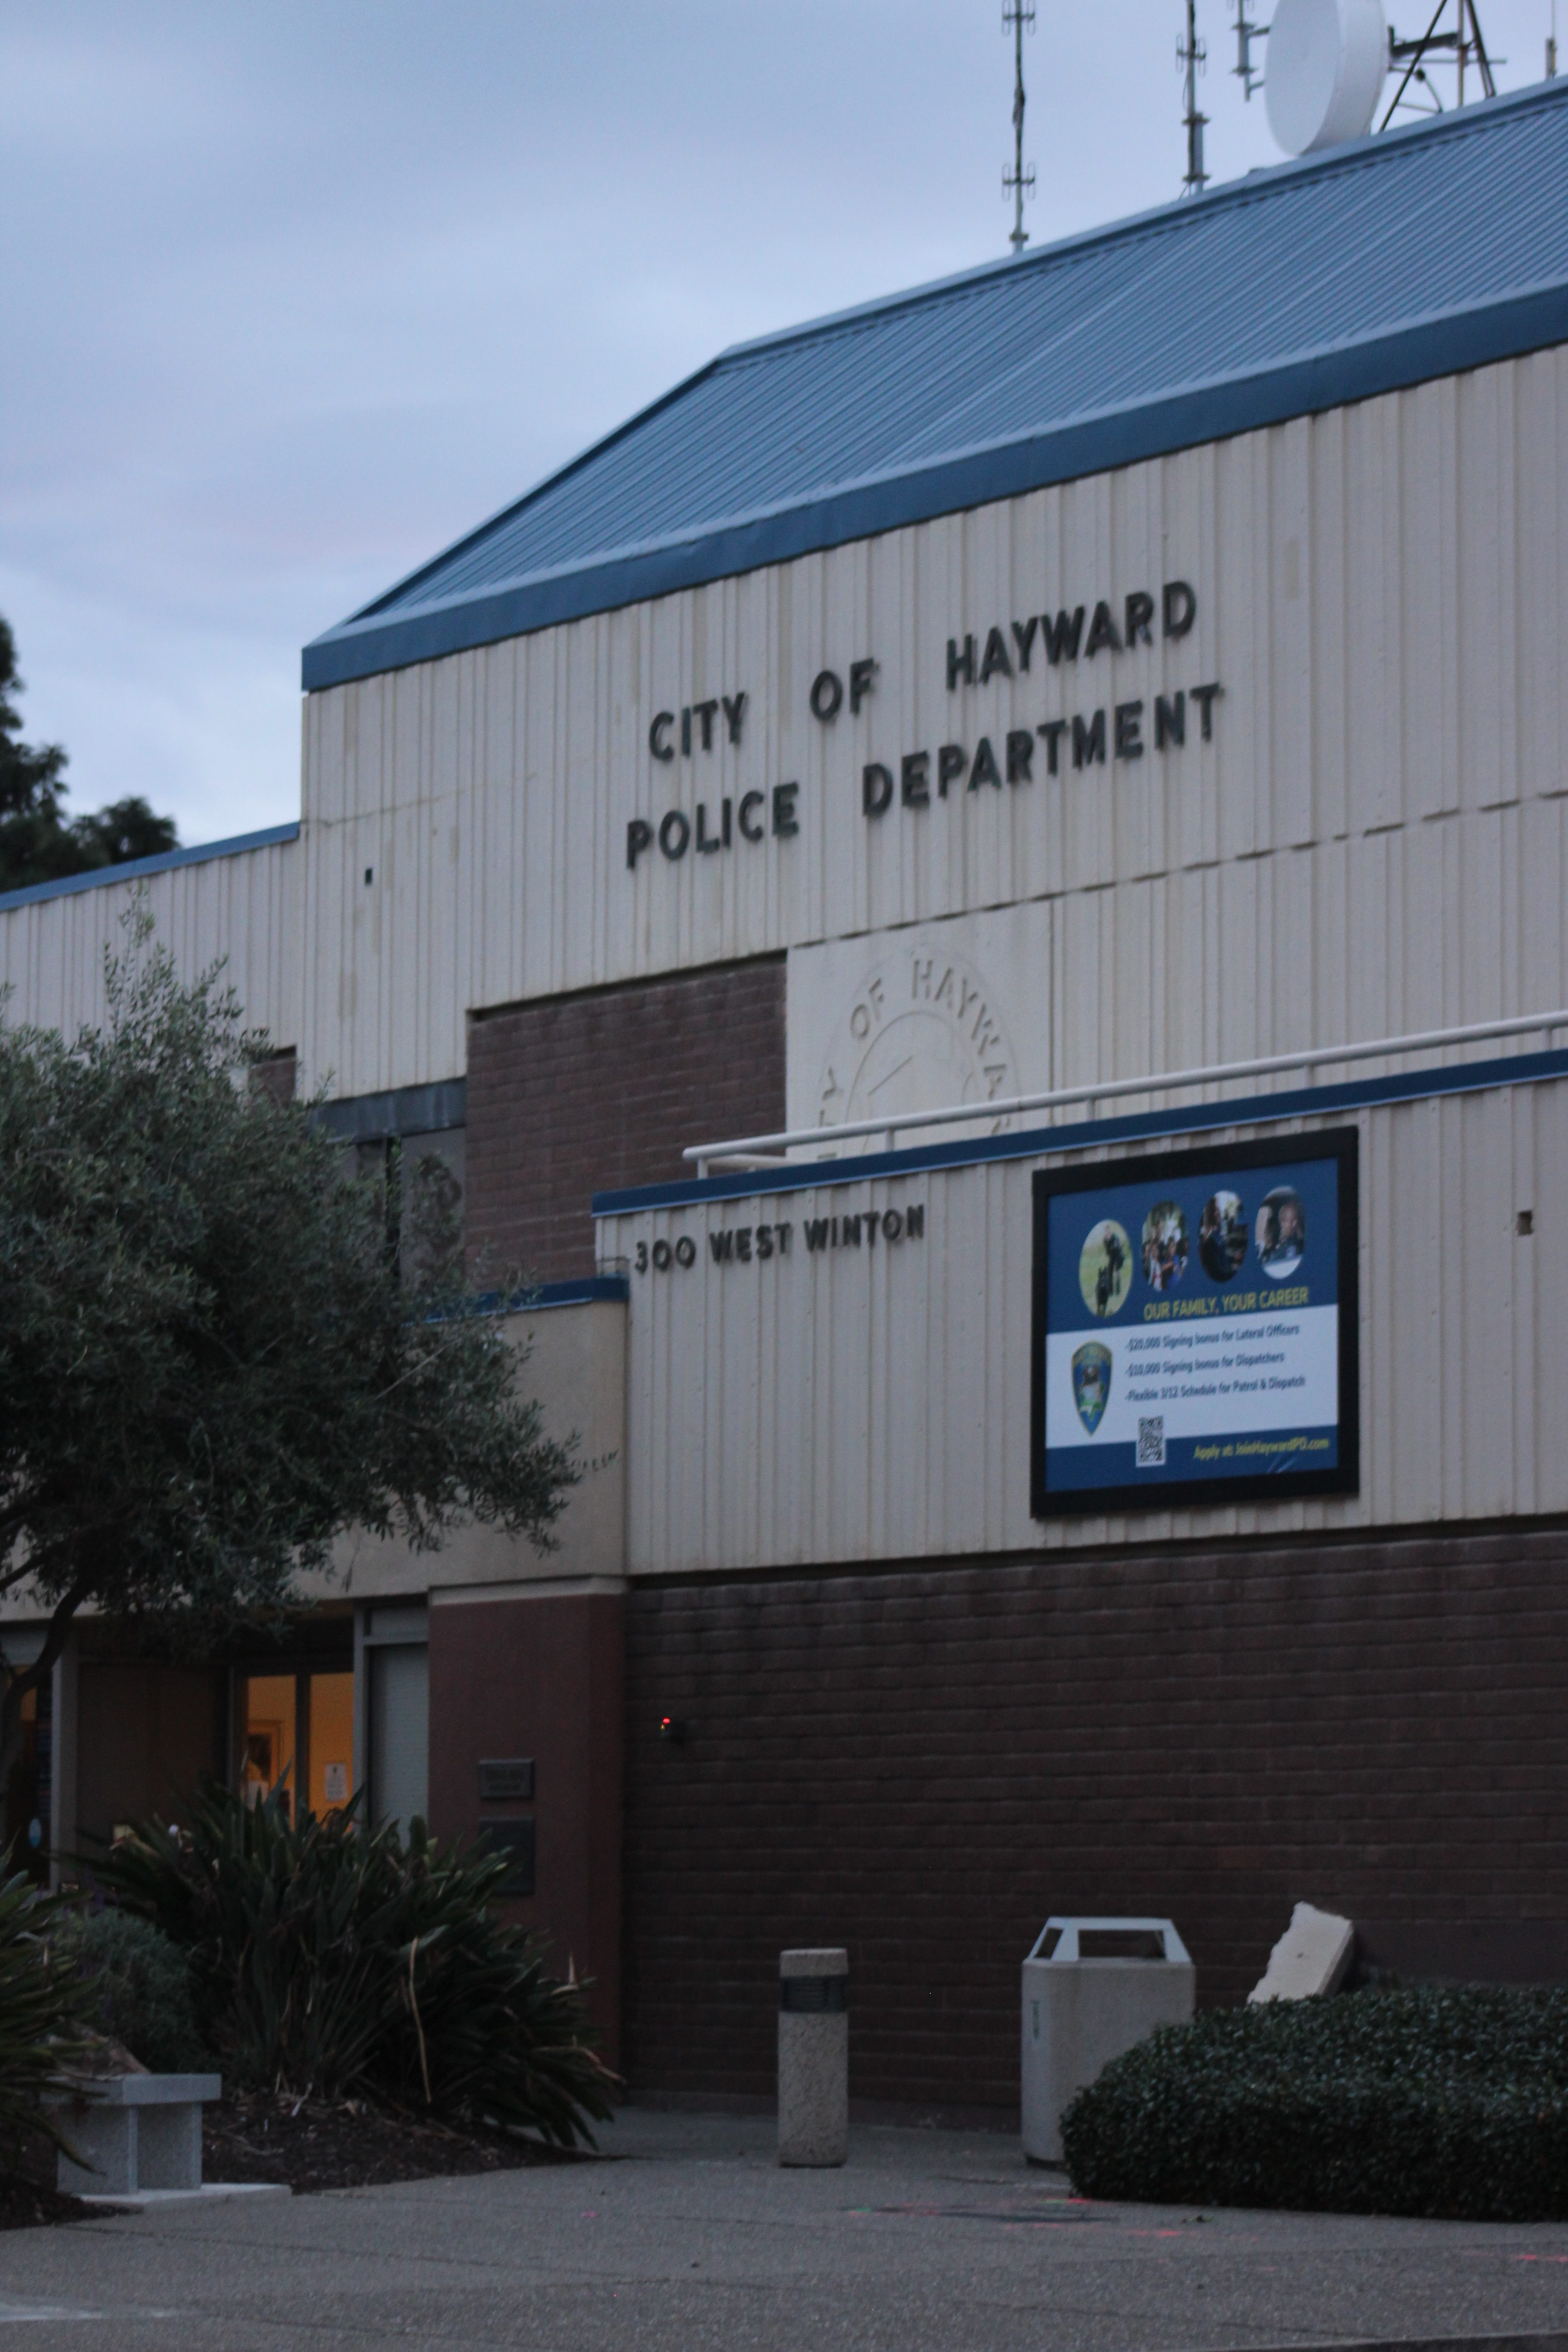 The Hayward Police Department headquarters where the jail is located.